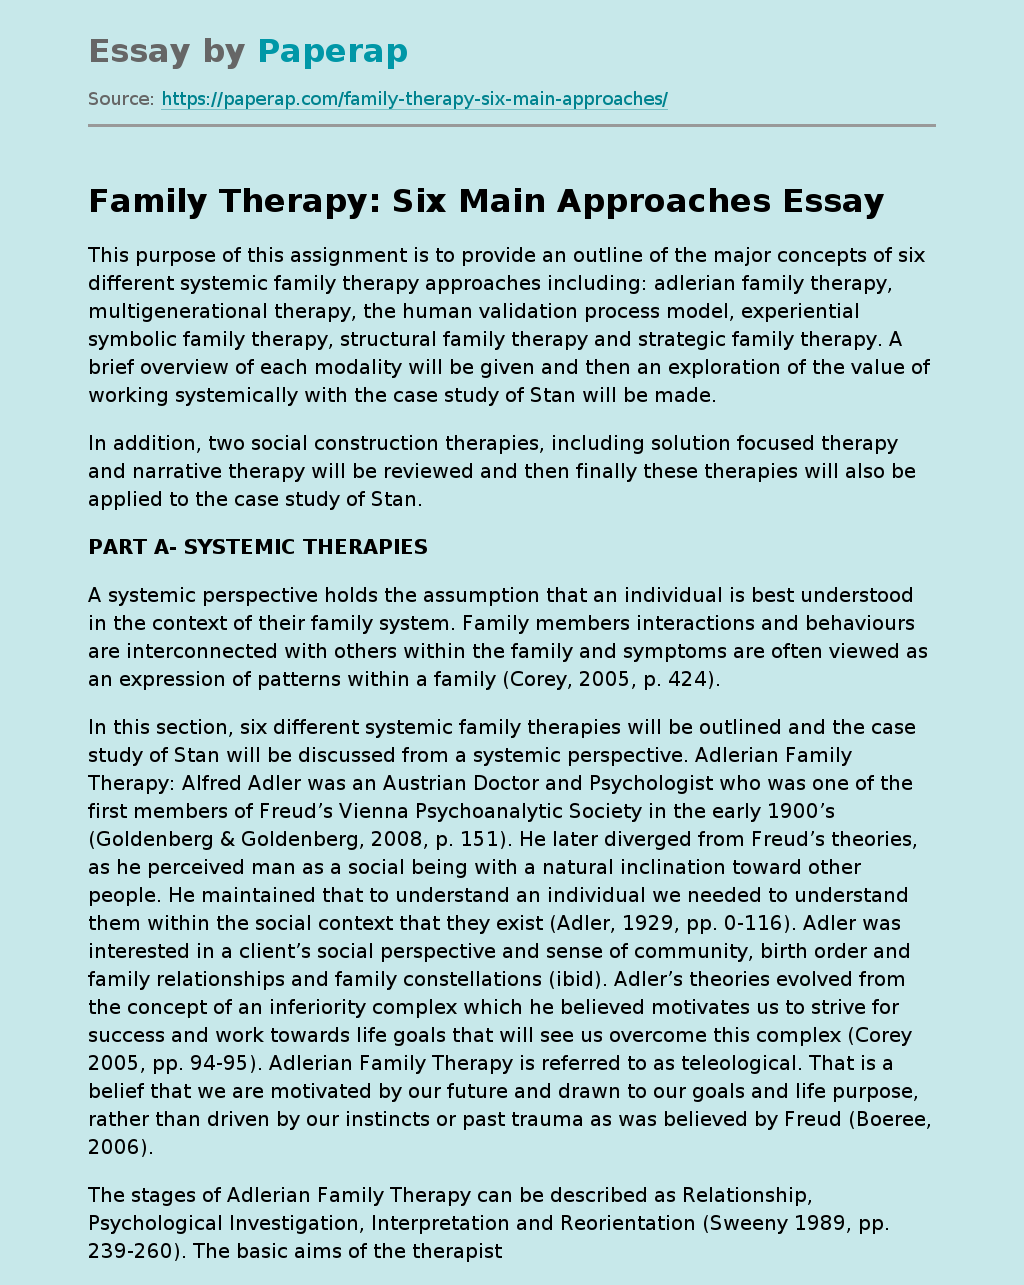 Family Therapy: Six Main Approaches